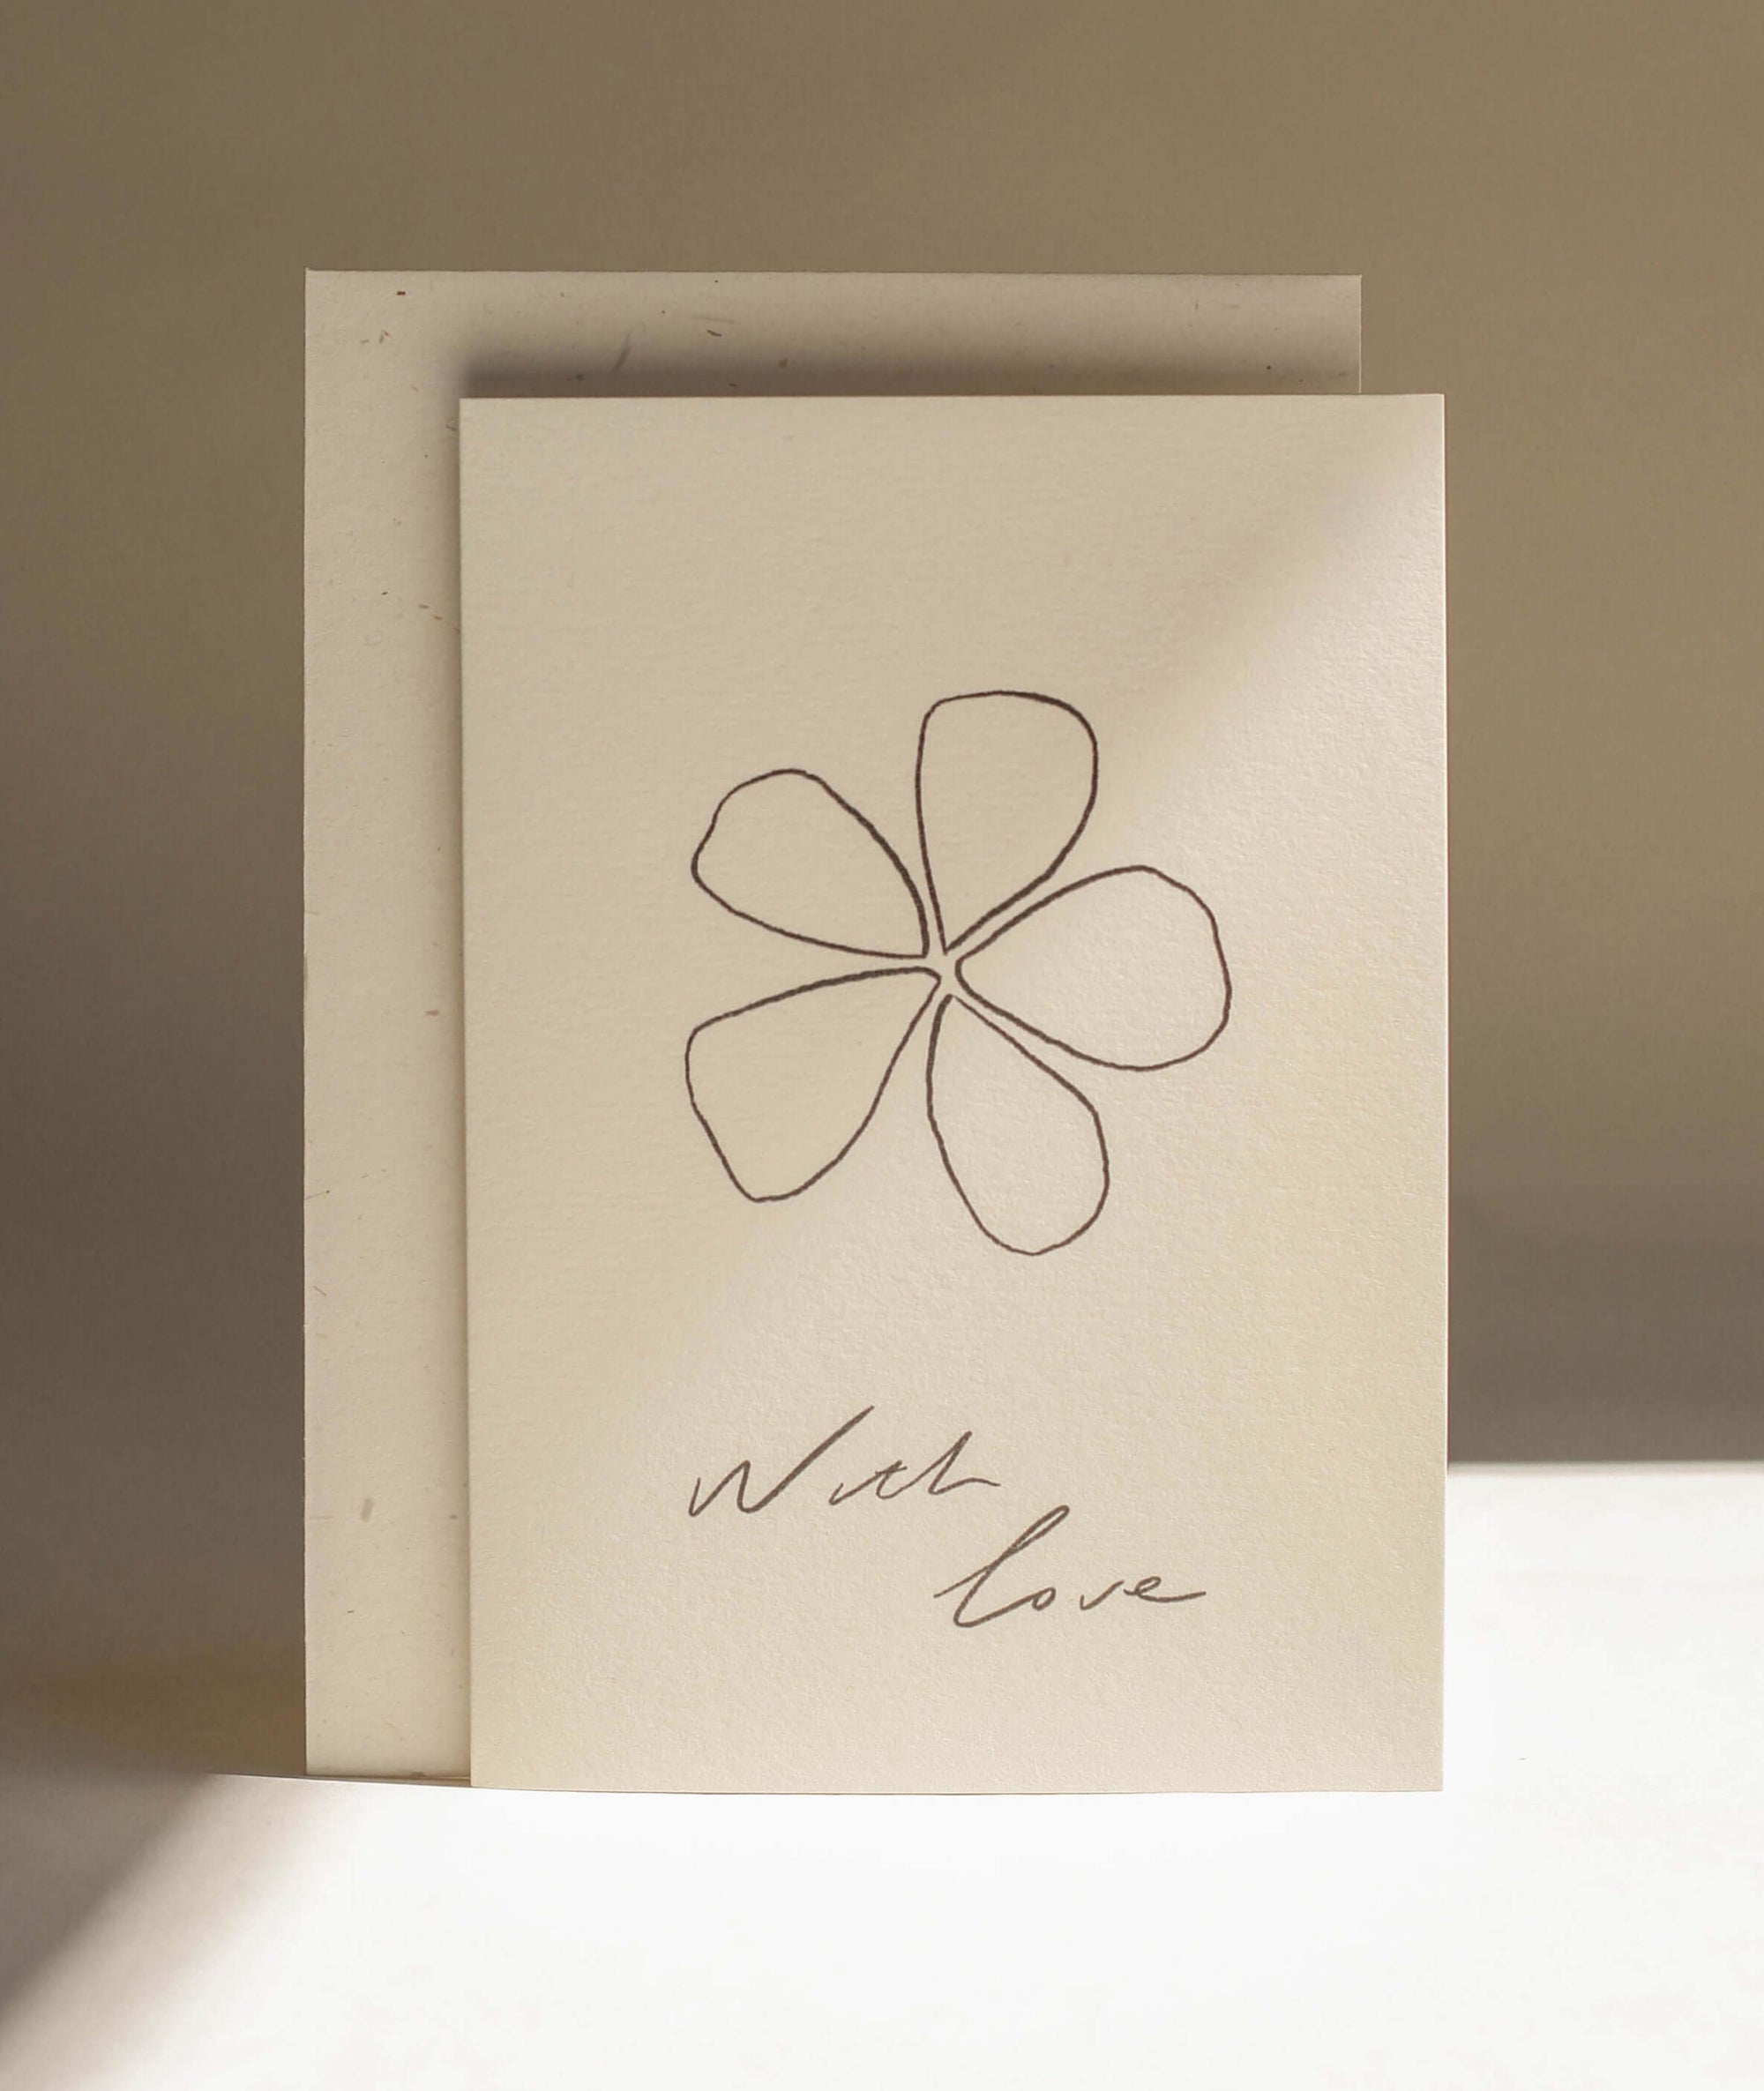 Greeting Card - The Hand Drawn Lettering Says &quot;With Love&quot; And A Hand Drawn Flower. 